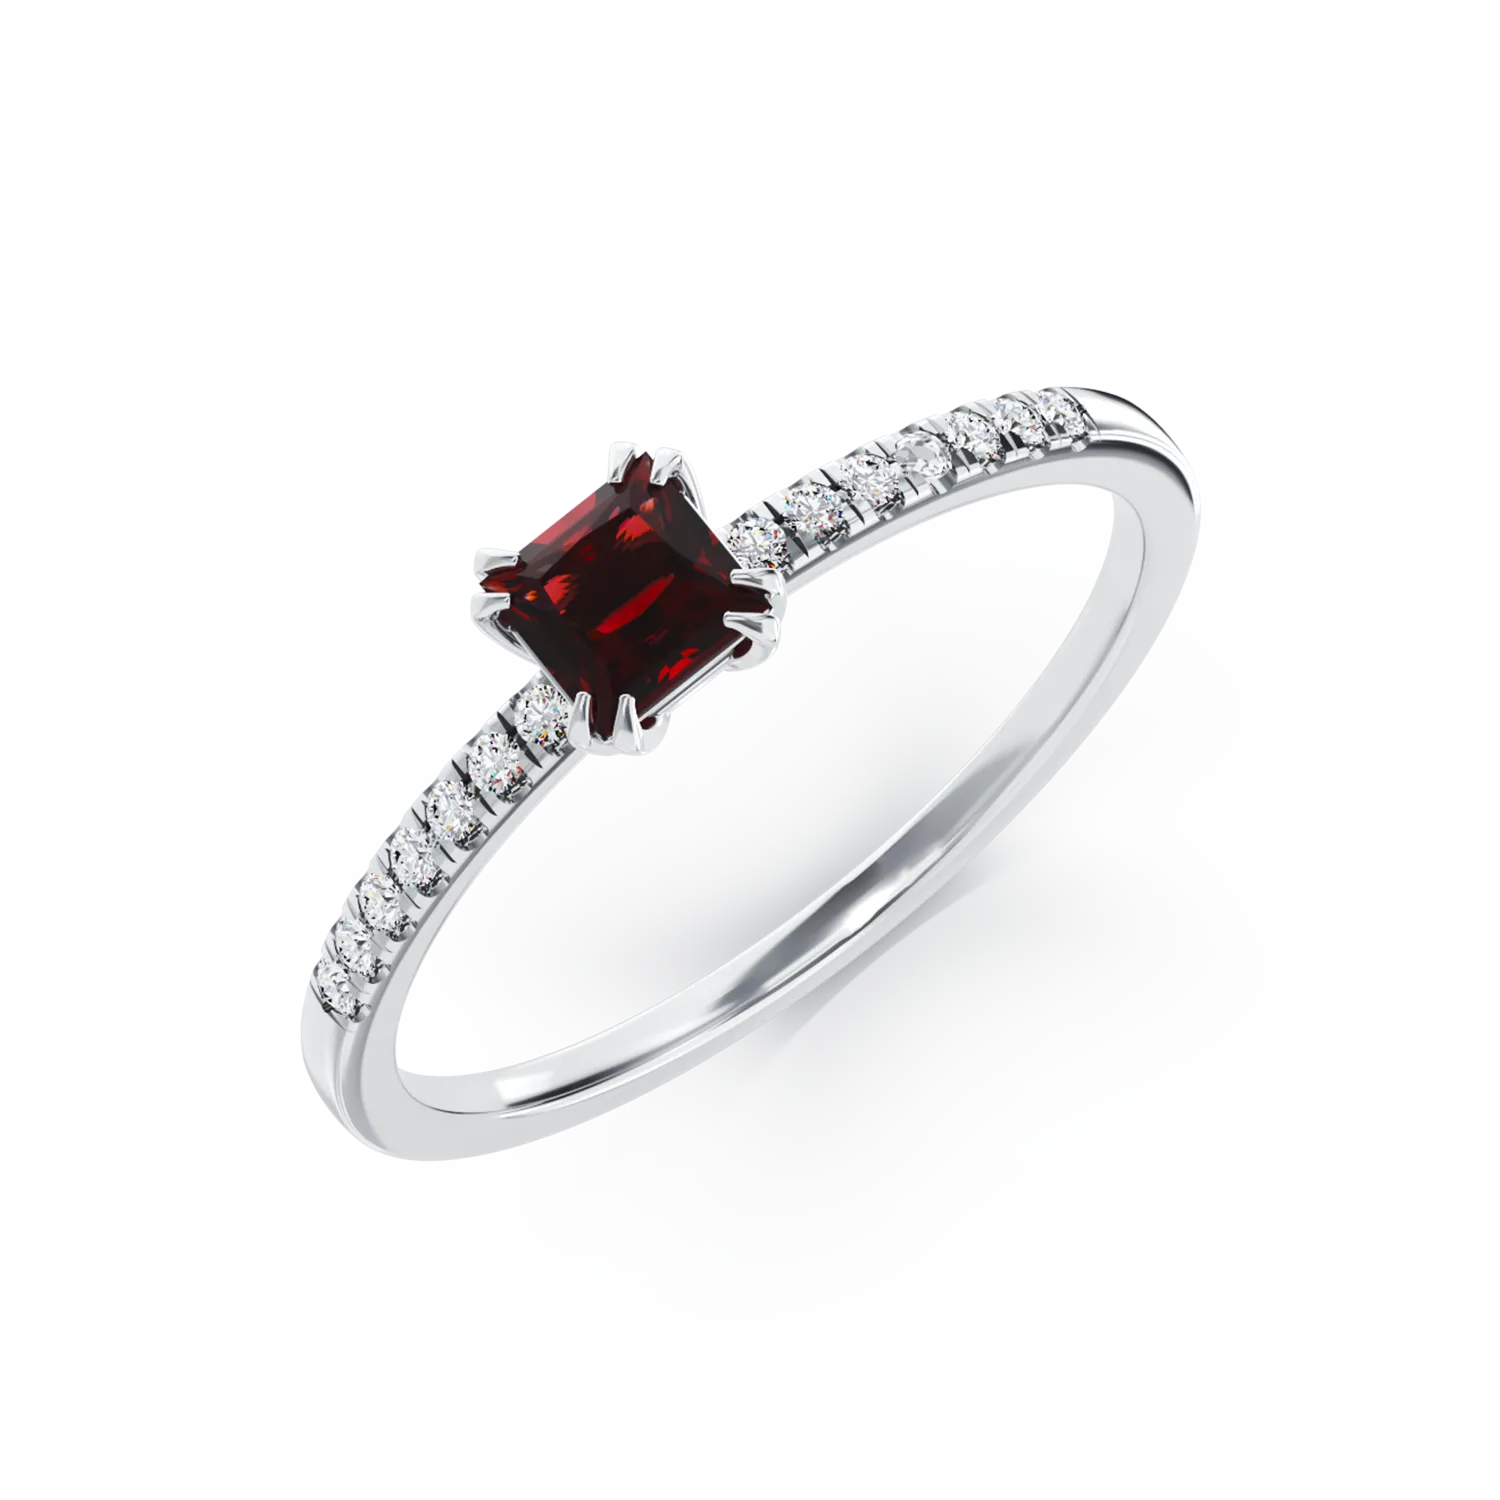 18K white gold engagement ring with 0.39ct multicolor tourmaline and 0.06ct diamonds